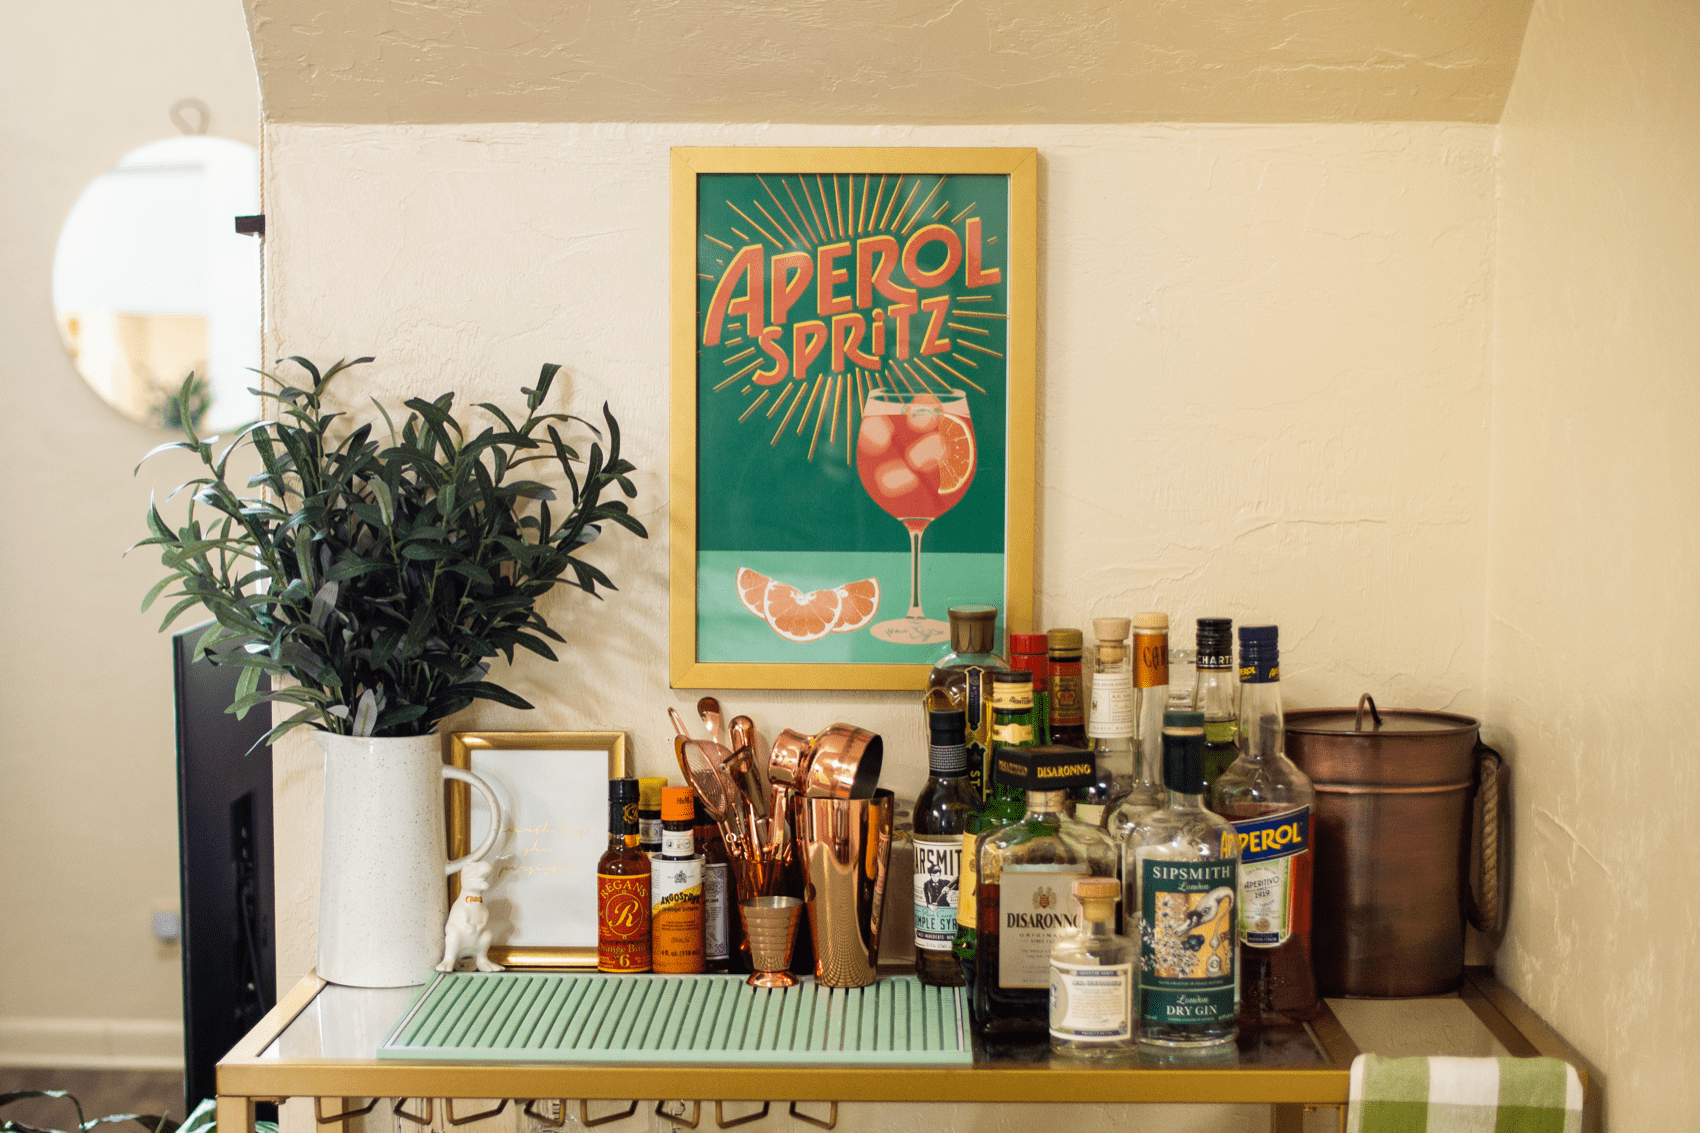 a home bar cart, with a small plant on the left, a tiny ceramic dinosaur and a bevy of cocktail mixers and utensils, alongside bitters and liquors. above the cart is a gold-framed 1920s style poster of a wine glass filled with aperol spritz, an orange slice, and some ice cubes with the words "aperol spritz" above. some orange slices sit next to the glass. 